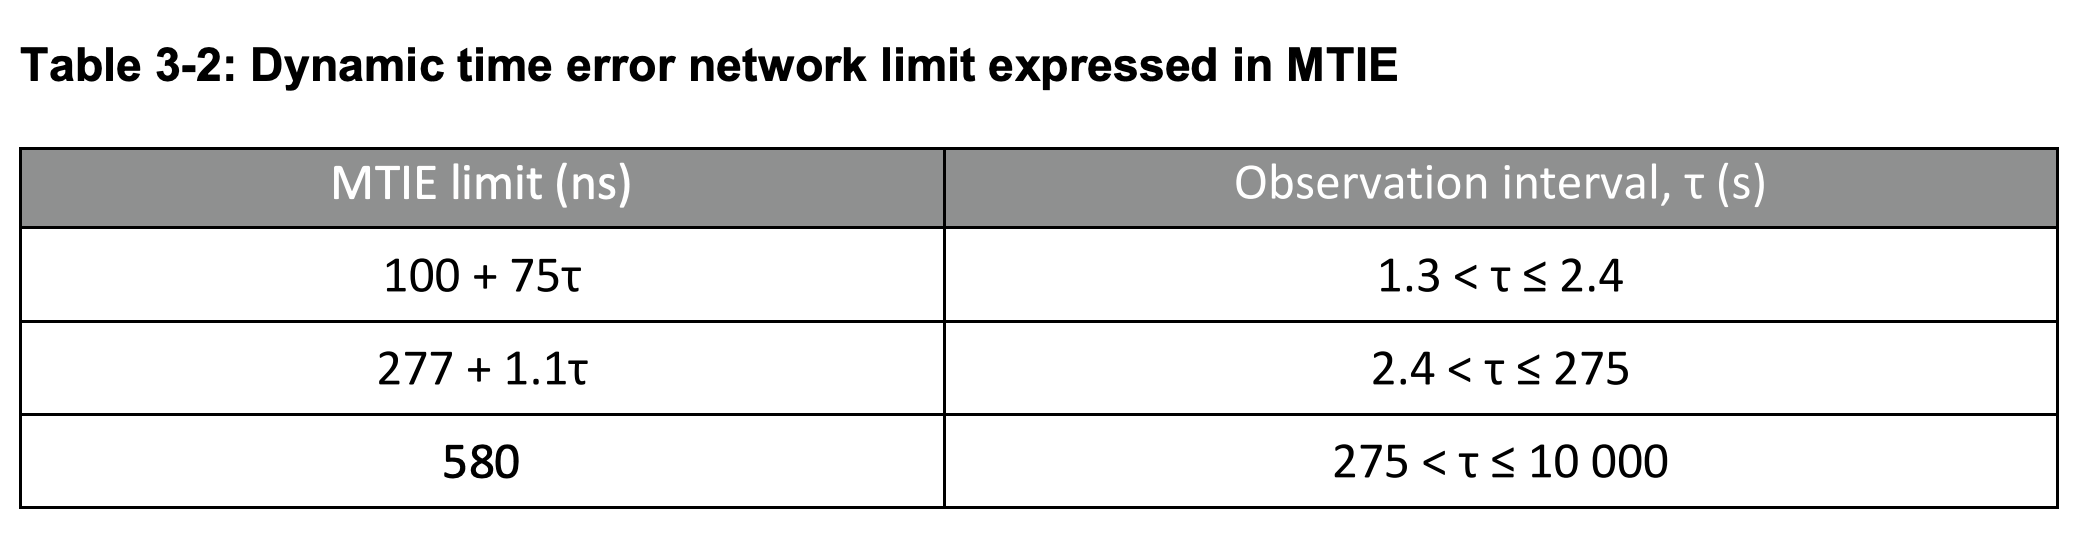 Table 3-2 Dynamic Time error network limit expressed in MTIE